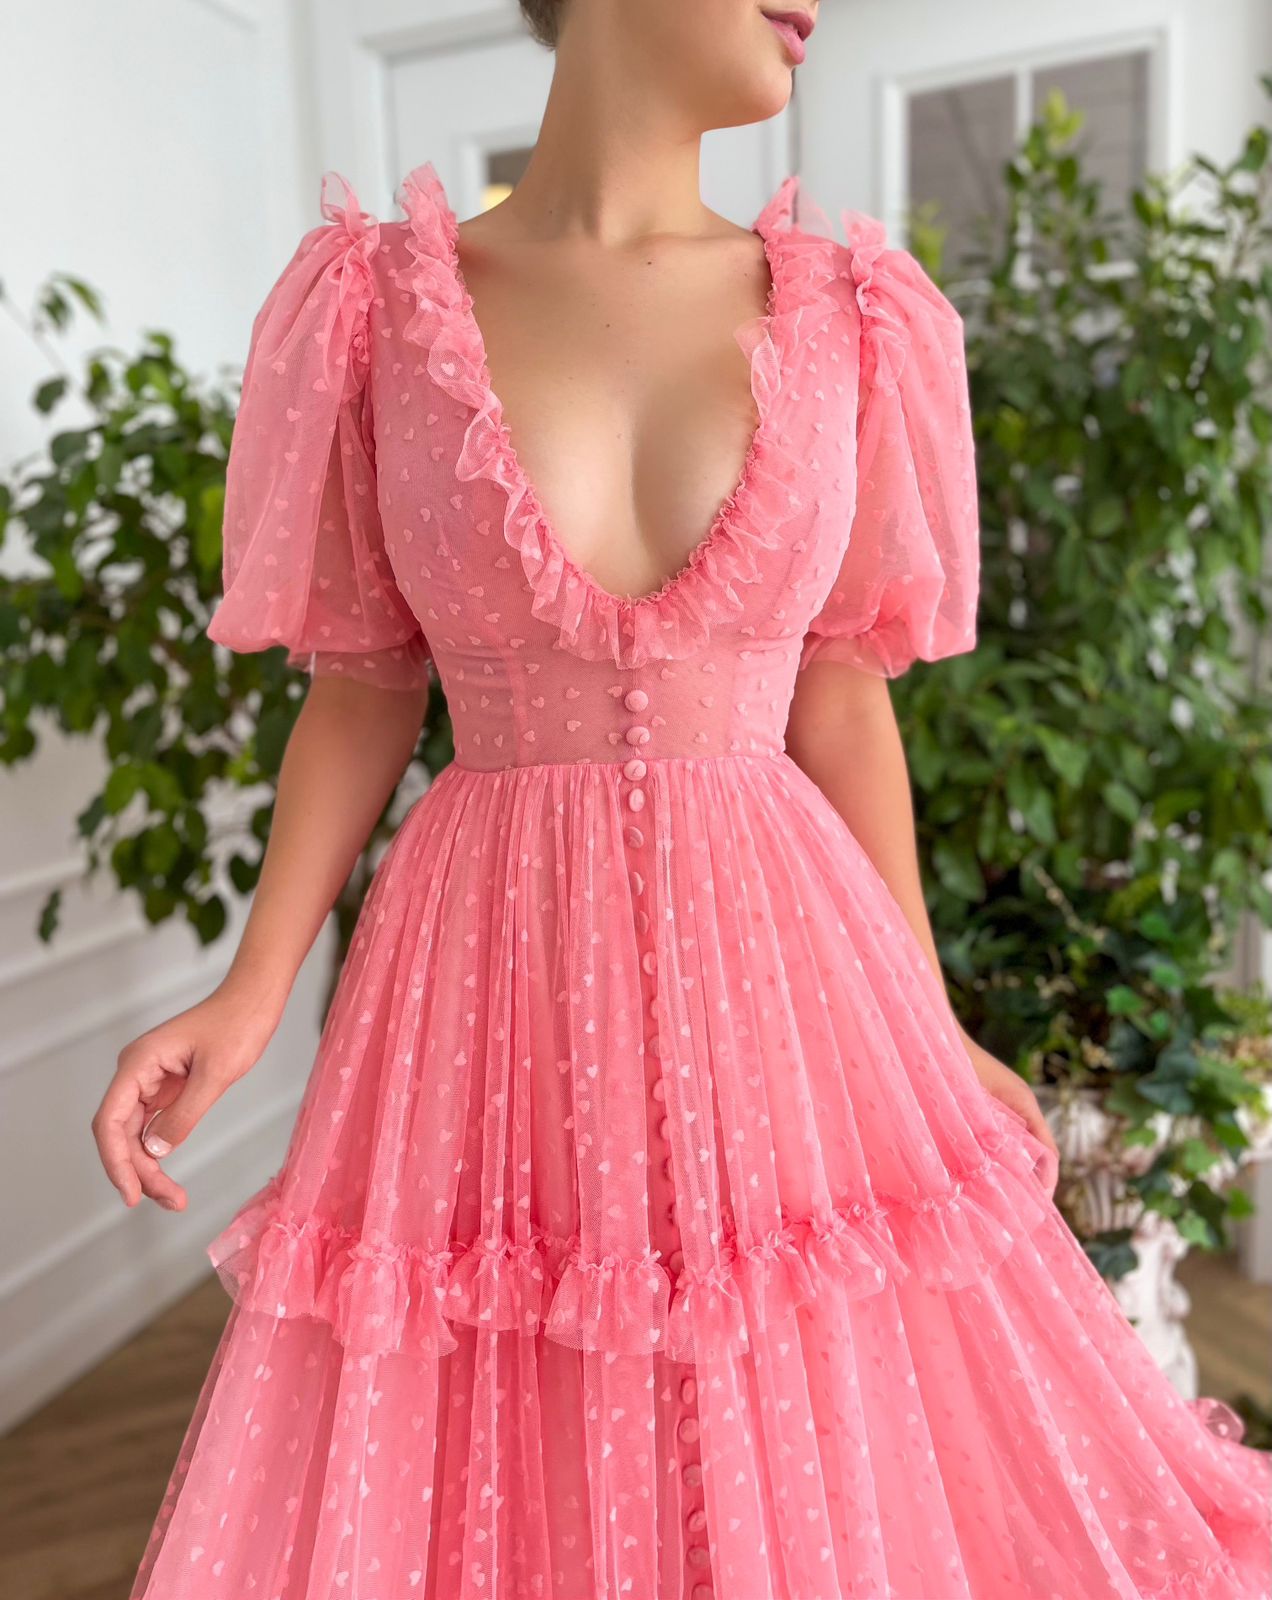 Pink A-Line dress with v-neck, short sleeves, ruffles and hearty fabric